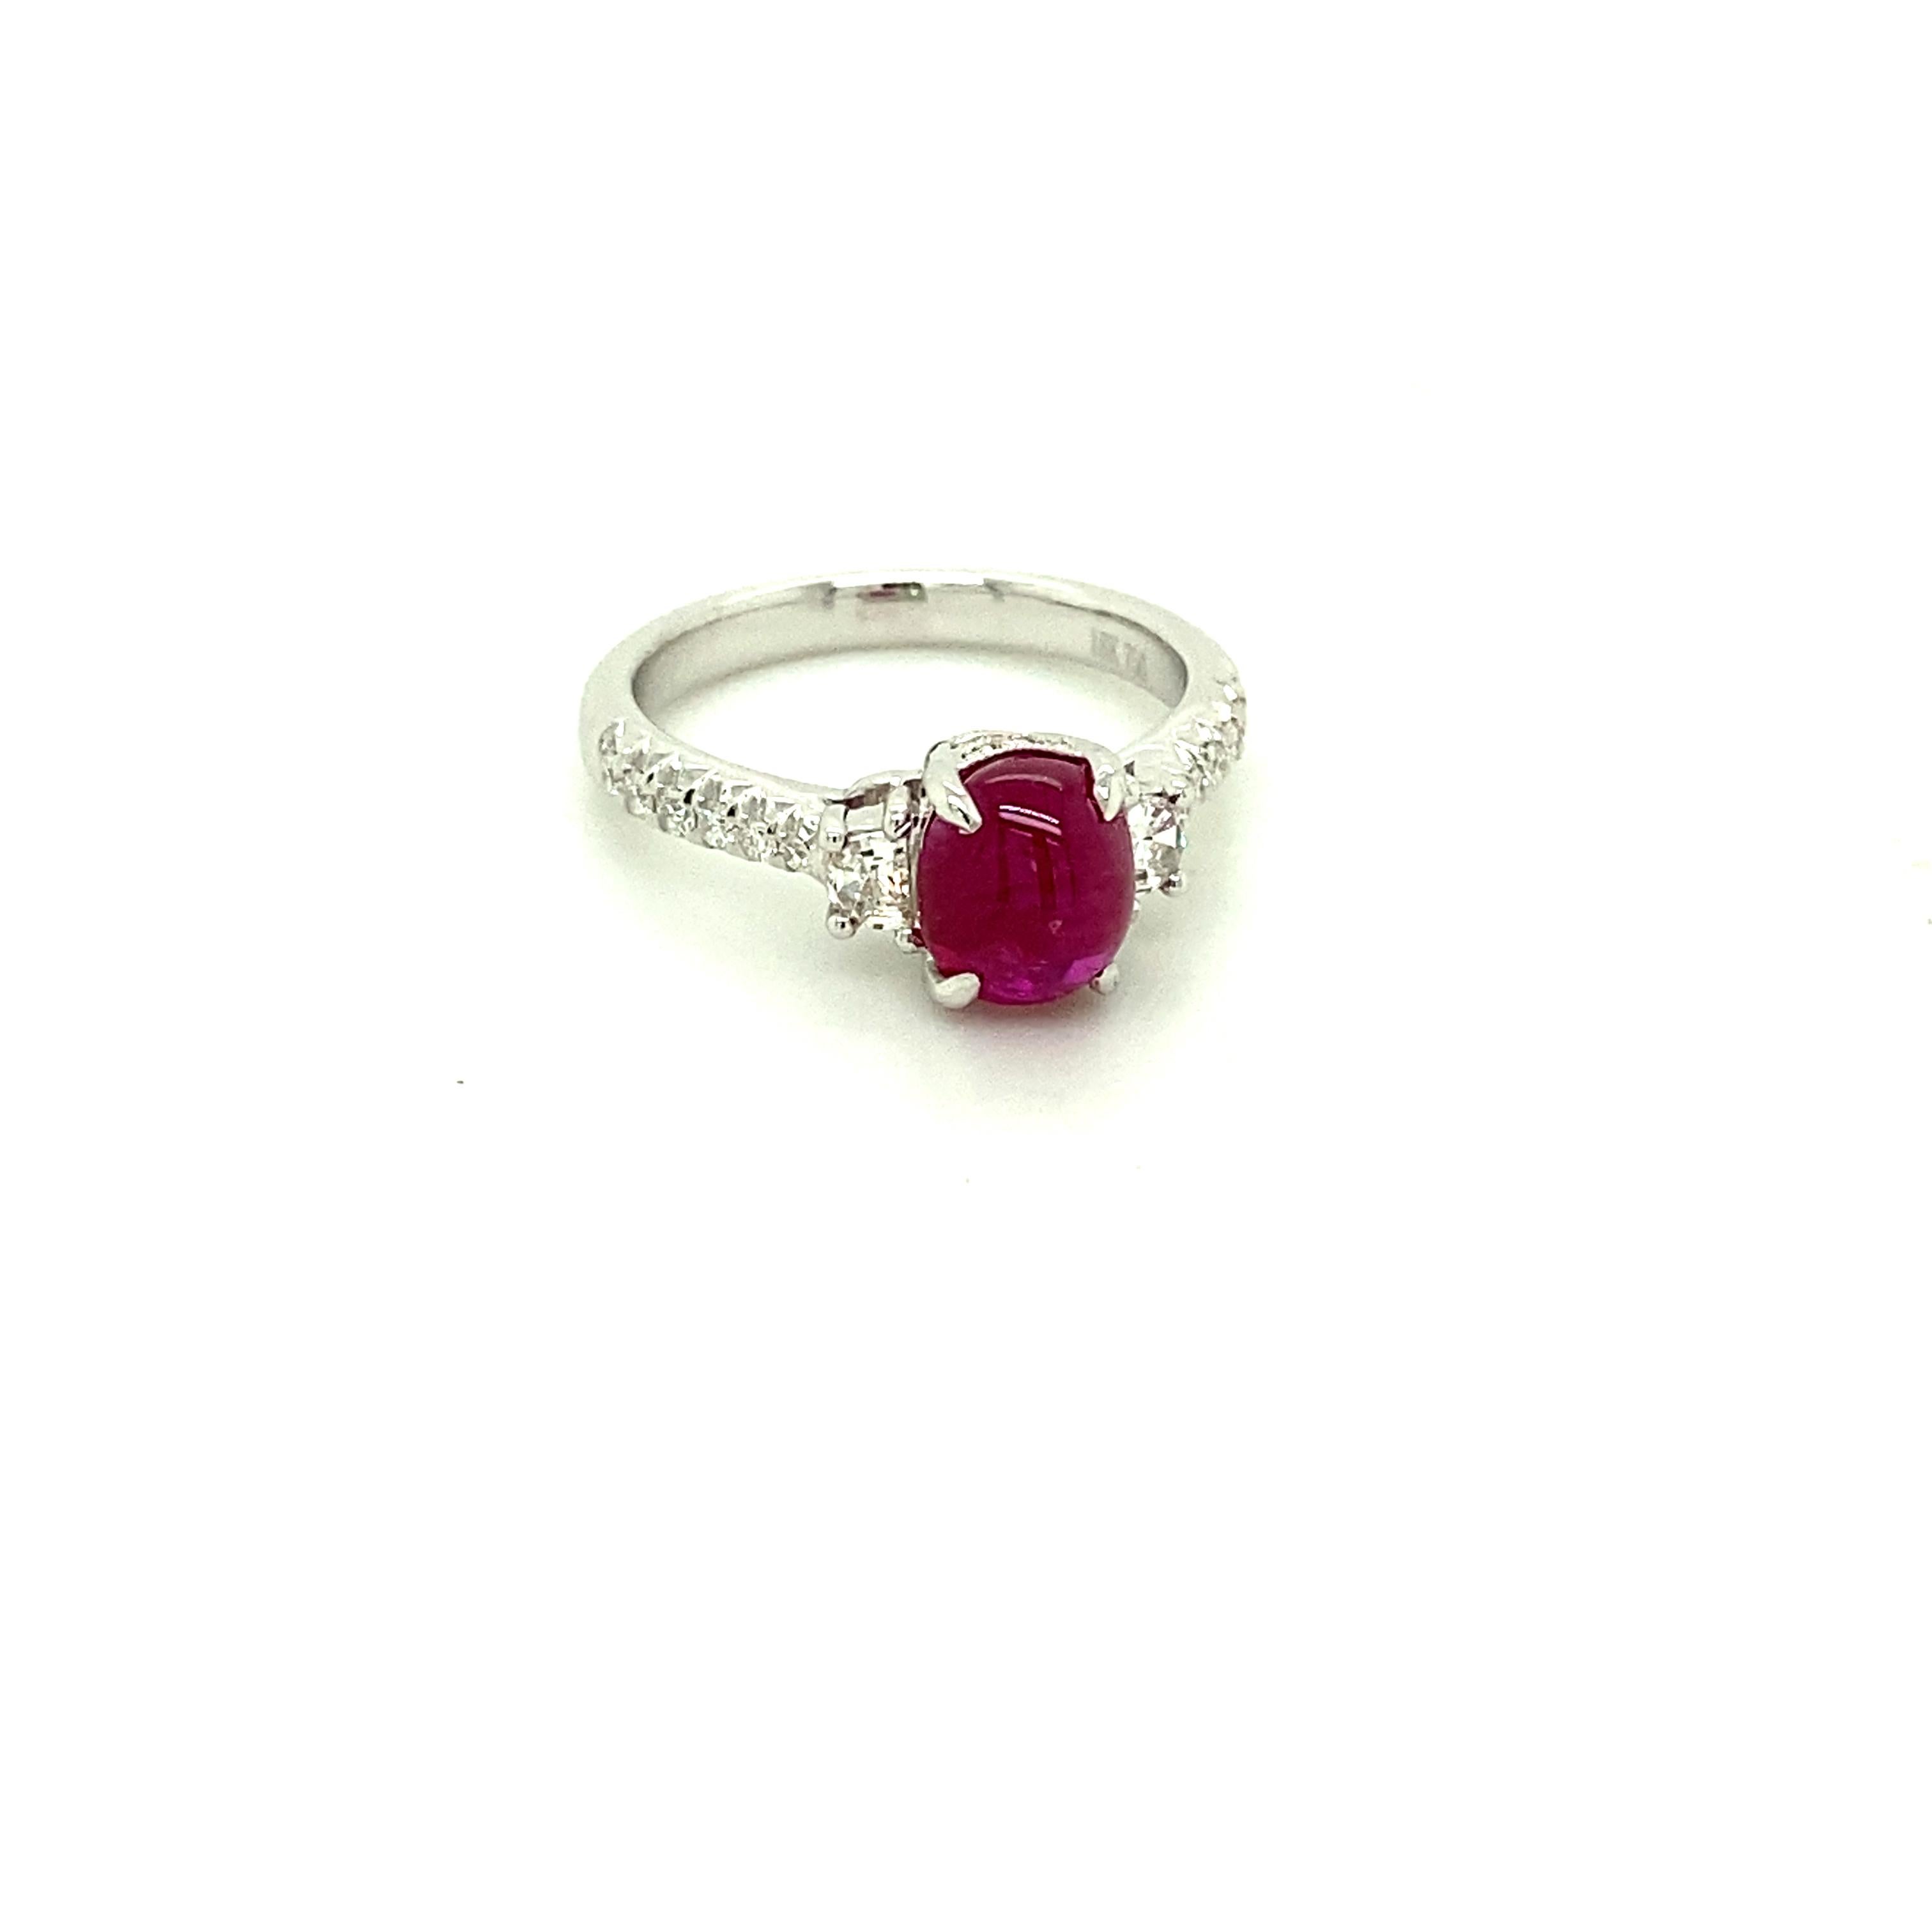 2.19 Carat GRS Certified Unheated Burmese Ruby Cabochon and Diamond Gold Ring:  

A beautiful ring, it features a rare GRS certified 2.19 carat unheated Burmese ruby cabochon with baguette white diamonds on both sides of the ruby weighing 0.23